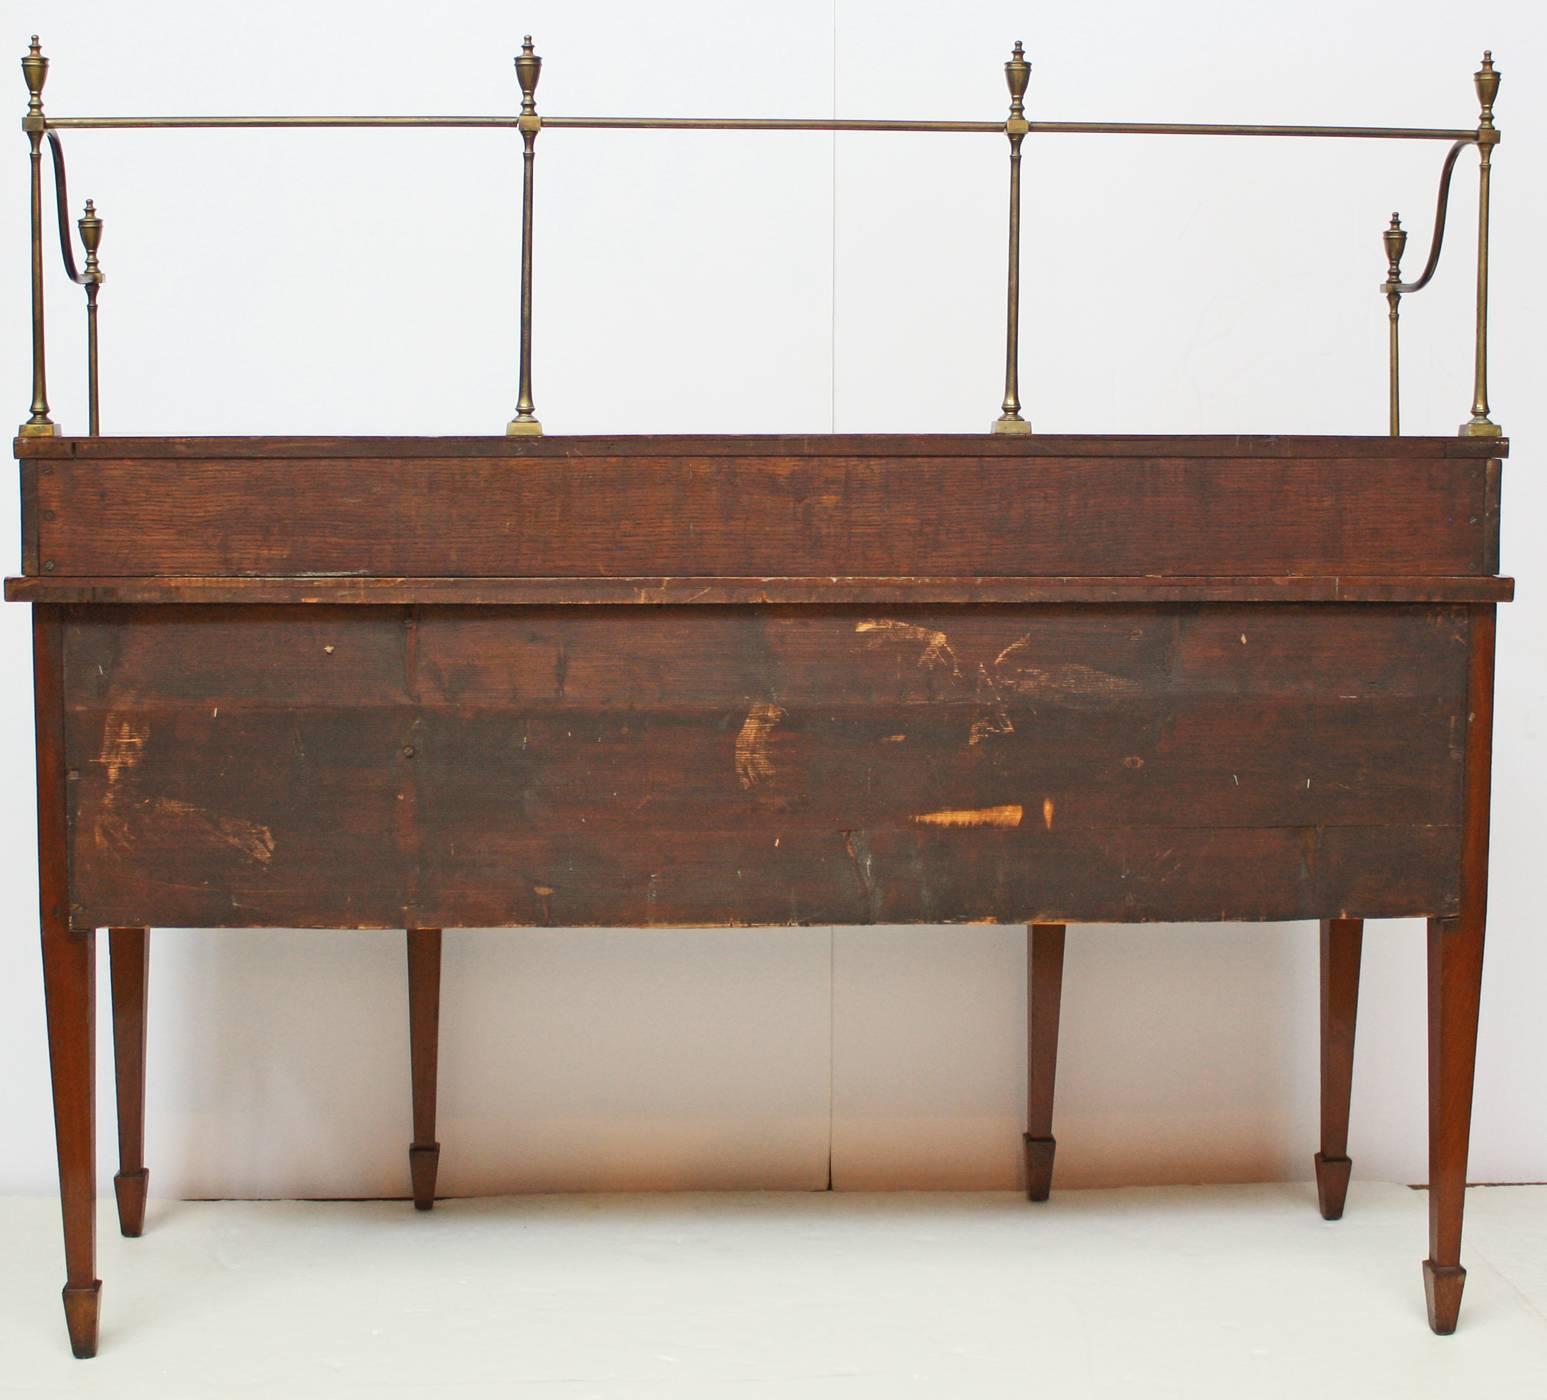 Japanned 18th Century Georgian Mahogany Sideboard with Brass Gallery Rail